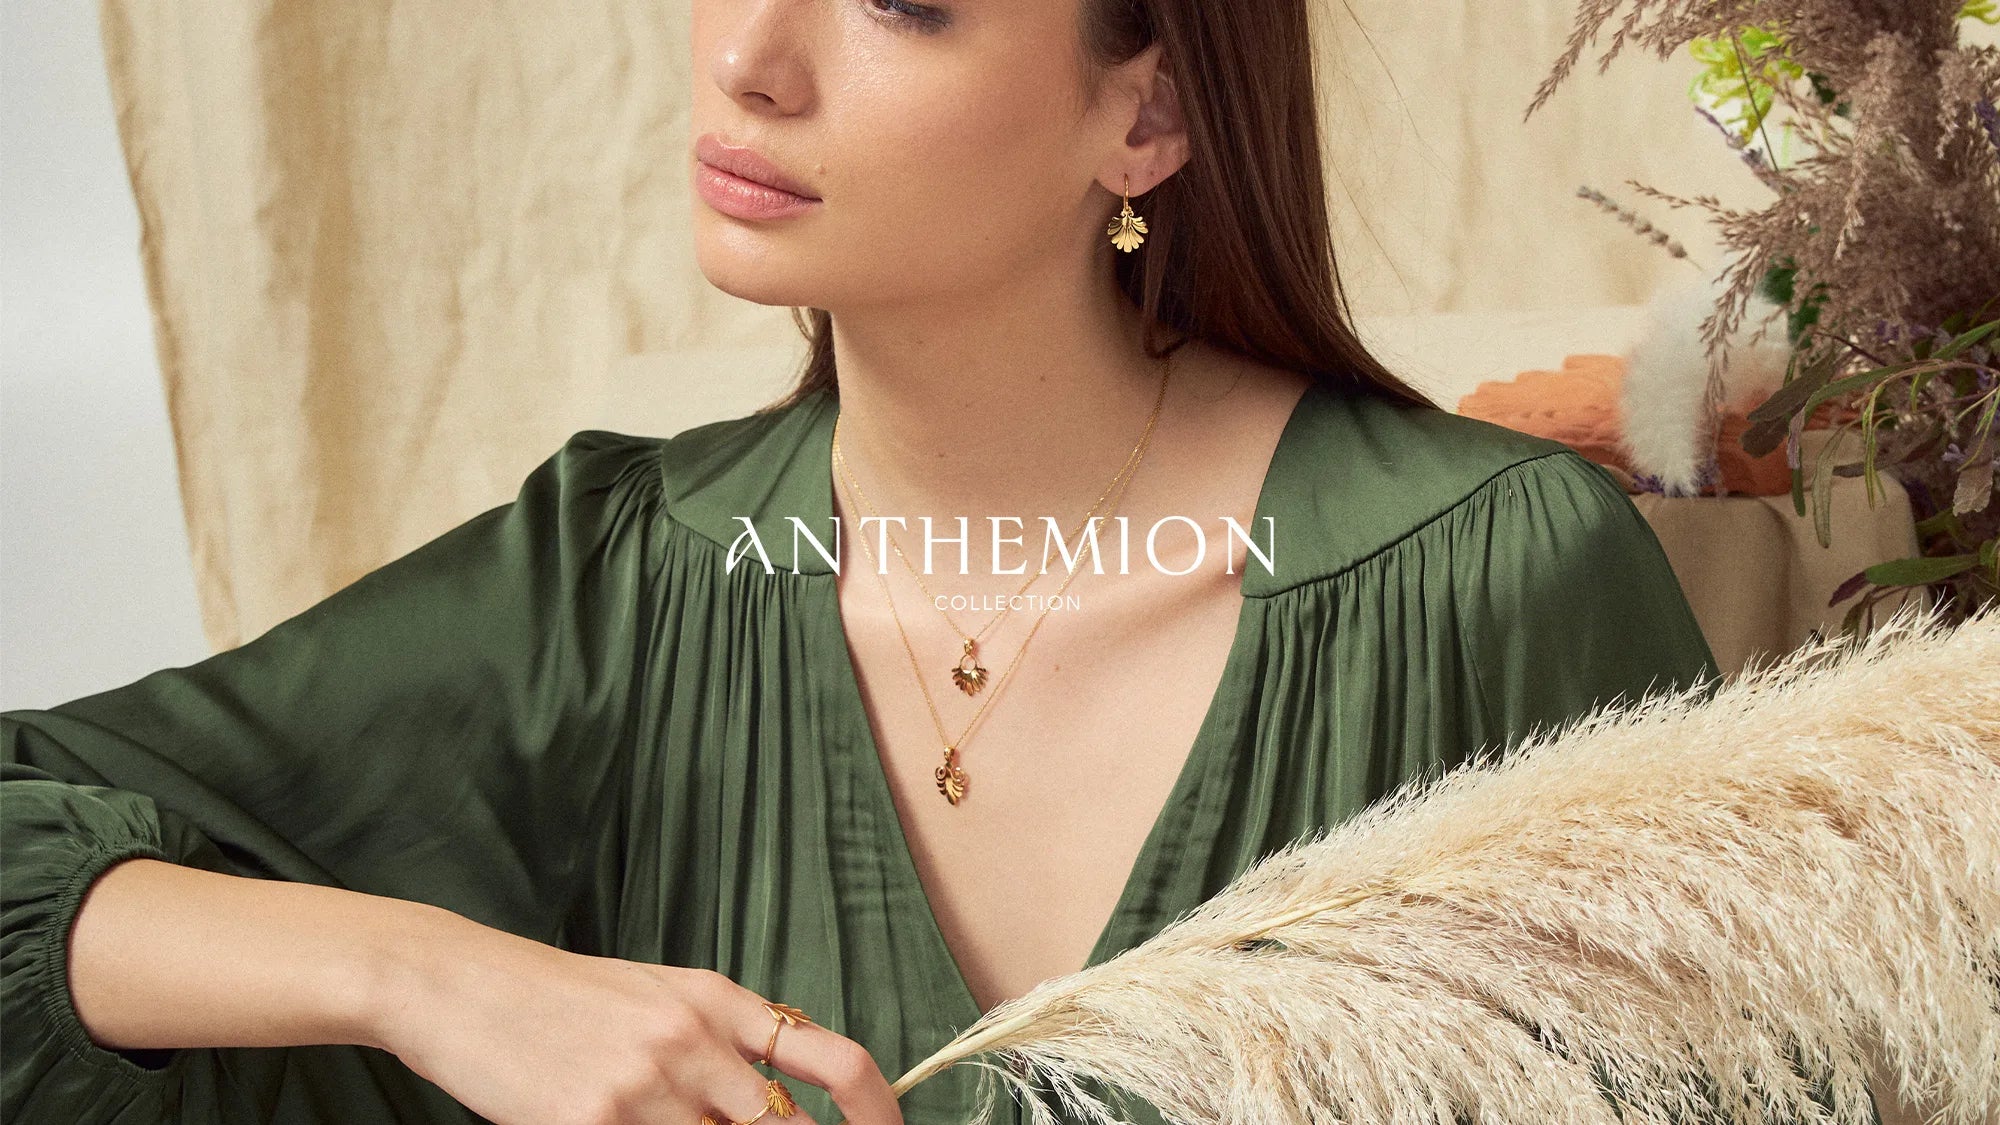 Anthemion collection handmade jewelry